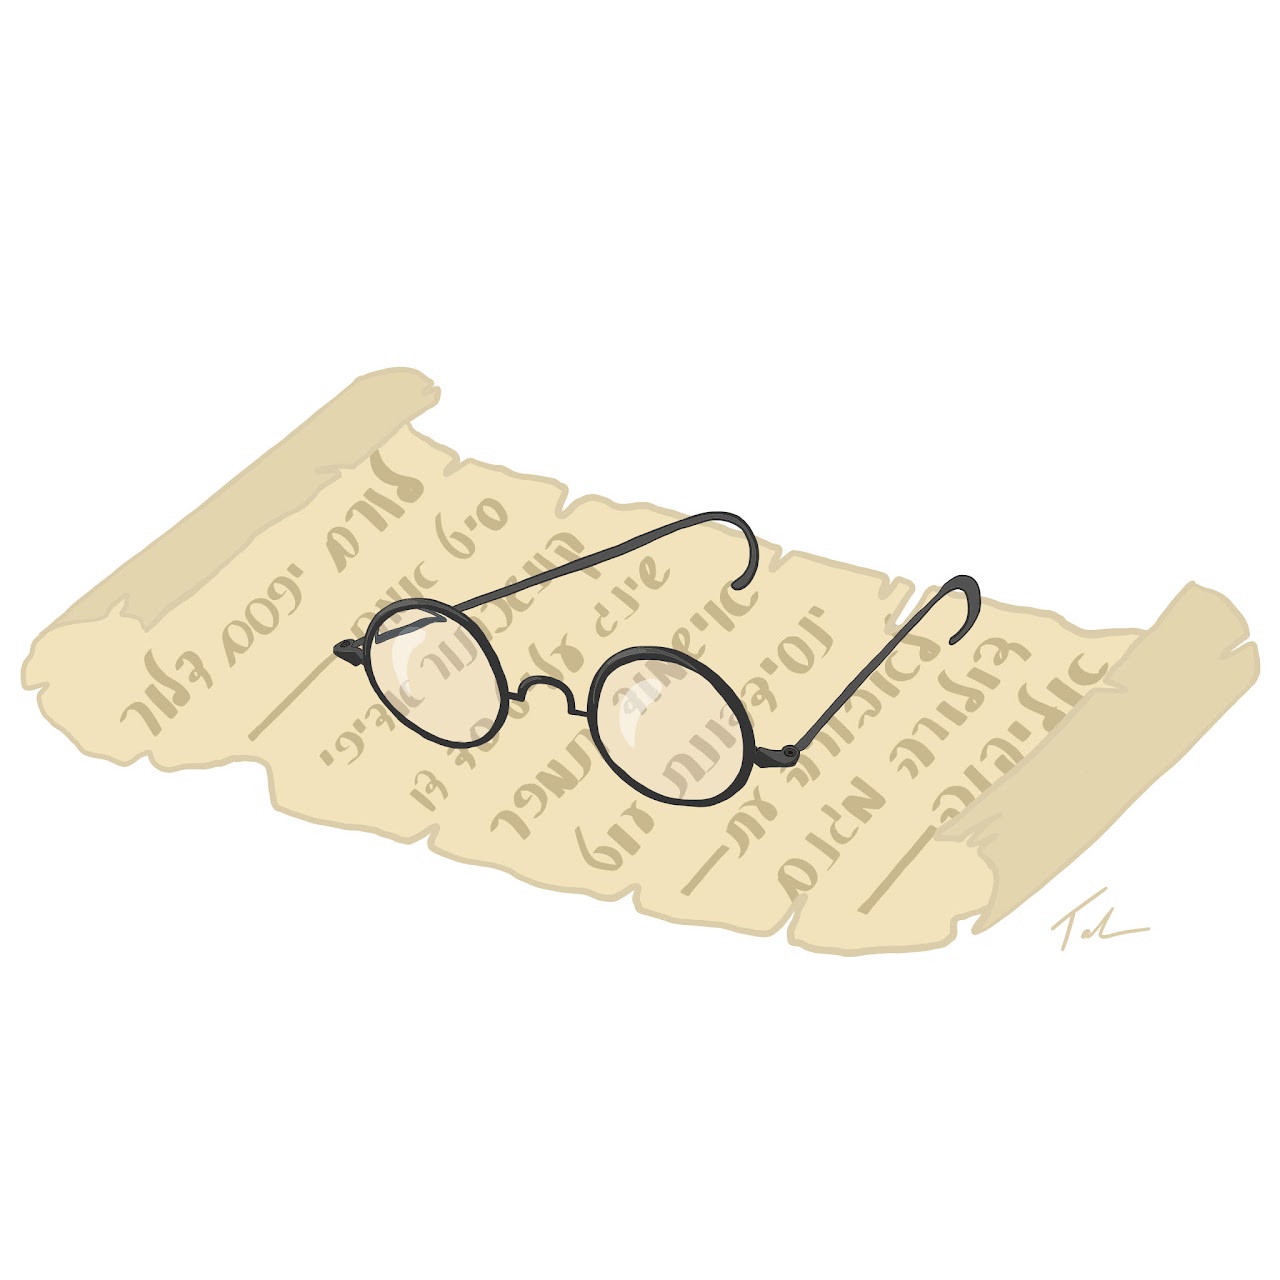 An illustration of glasses on an unfurled scroll covered in ancient text.